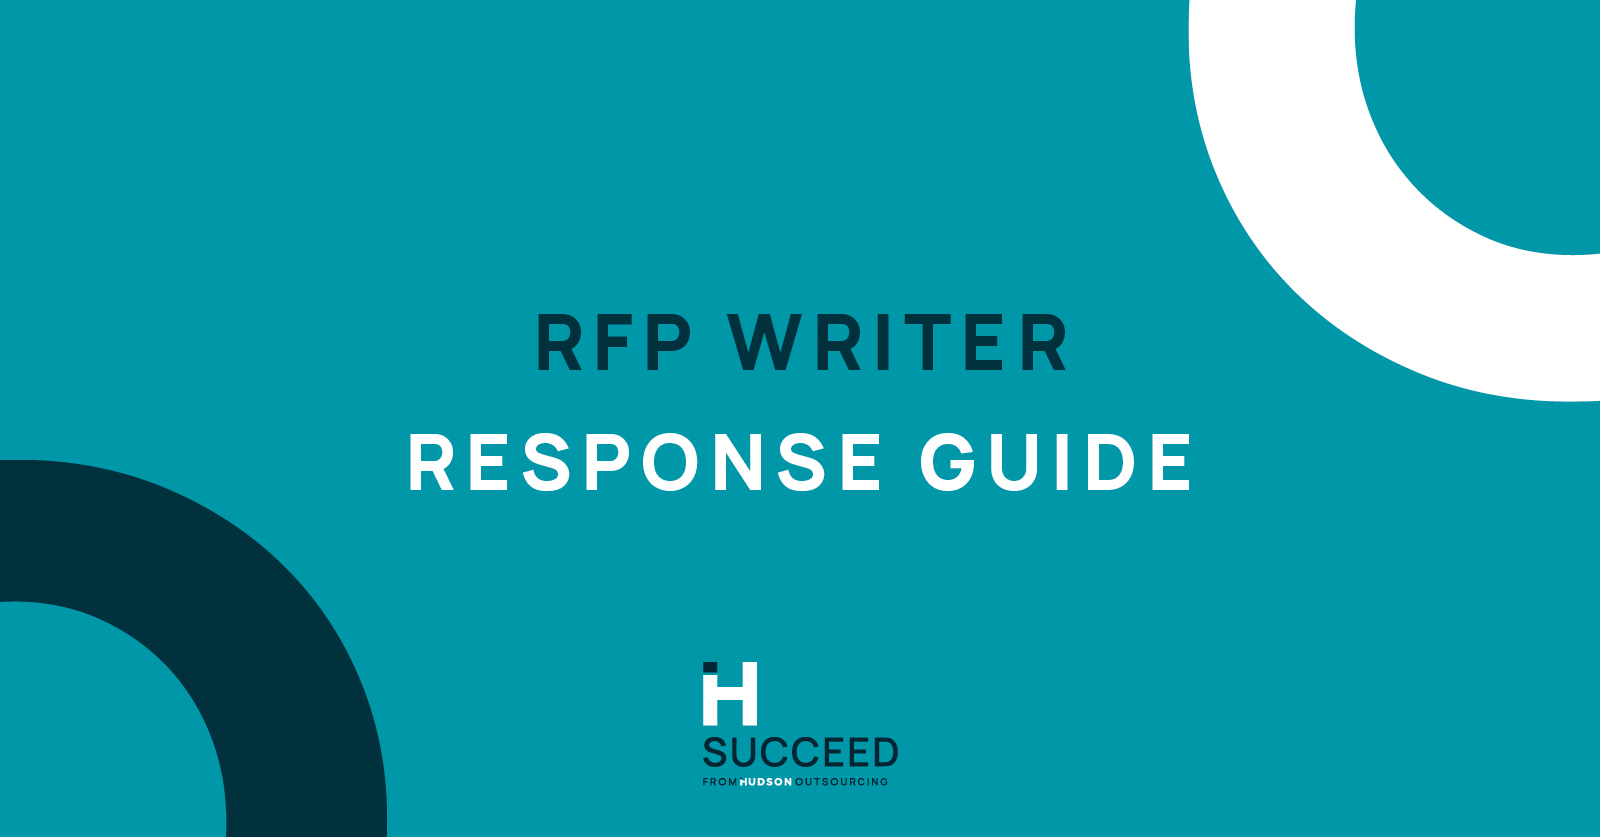 How to Win an RFP: 5 Smart Moves to Increase Your Win Rate